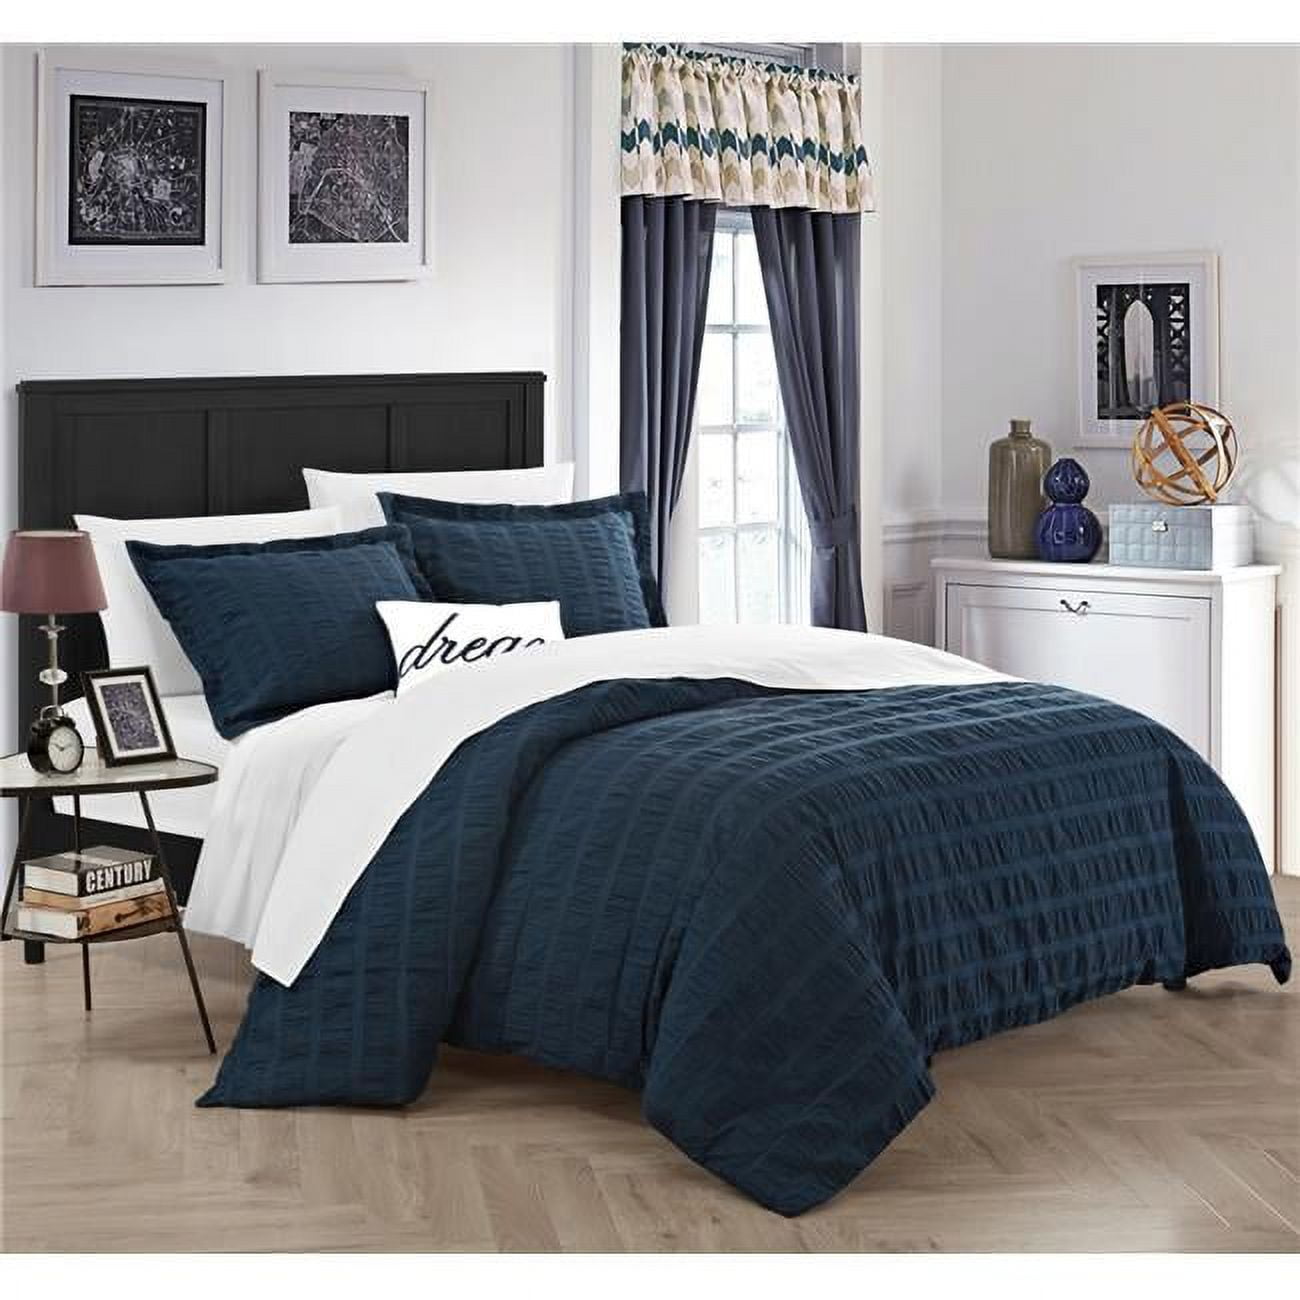 DS3118 Amarillo Duvet Cover Set, King Size - Navy, 4 Piece -  Chic Home, DS3118-US